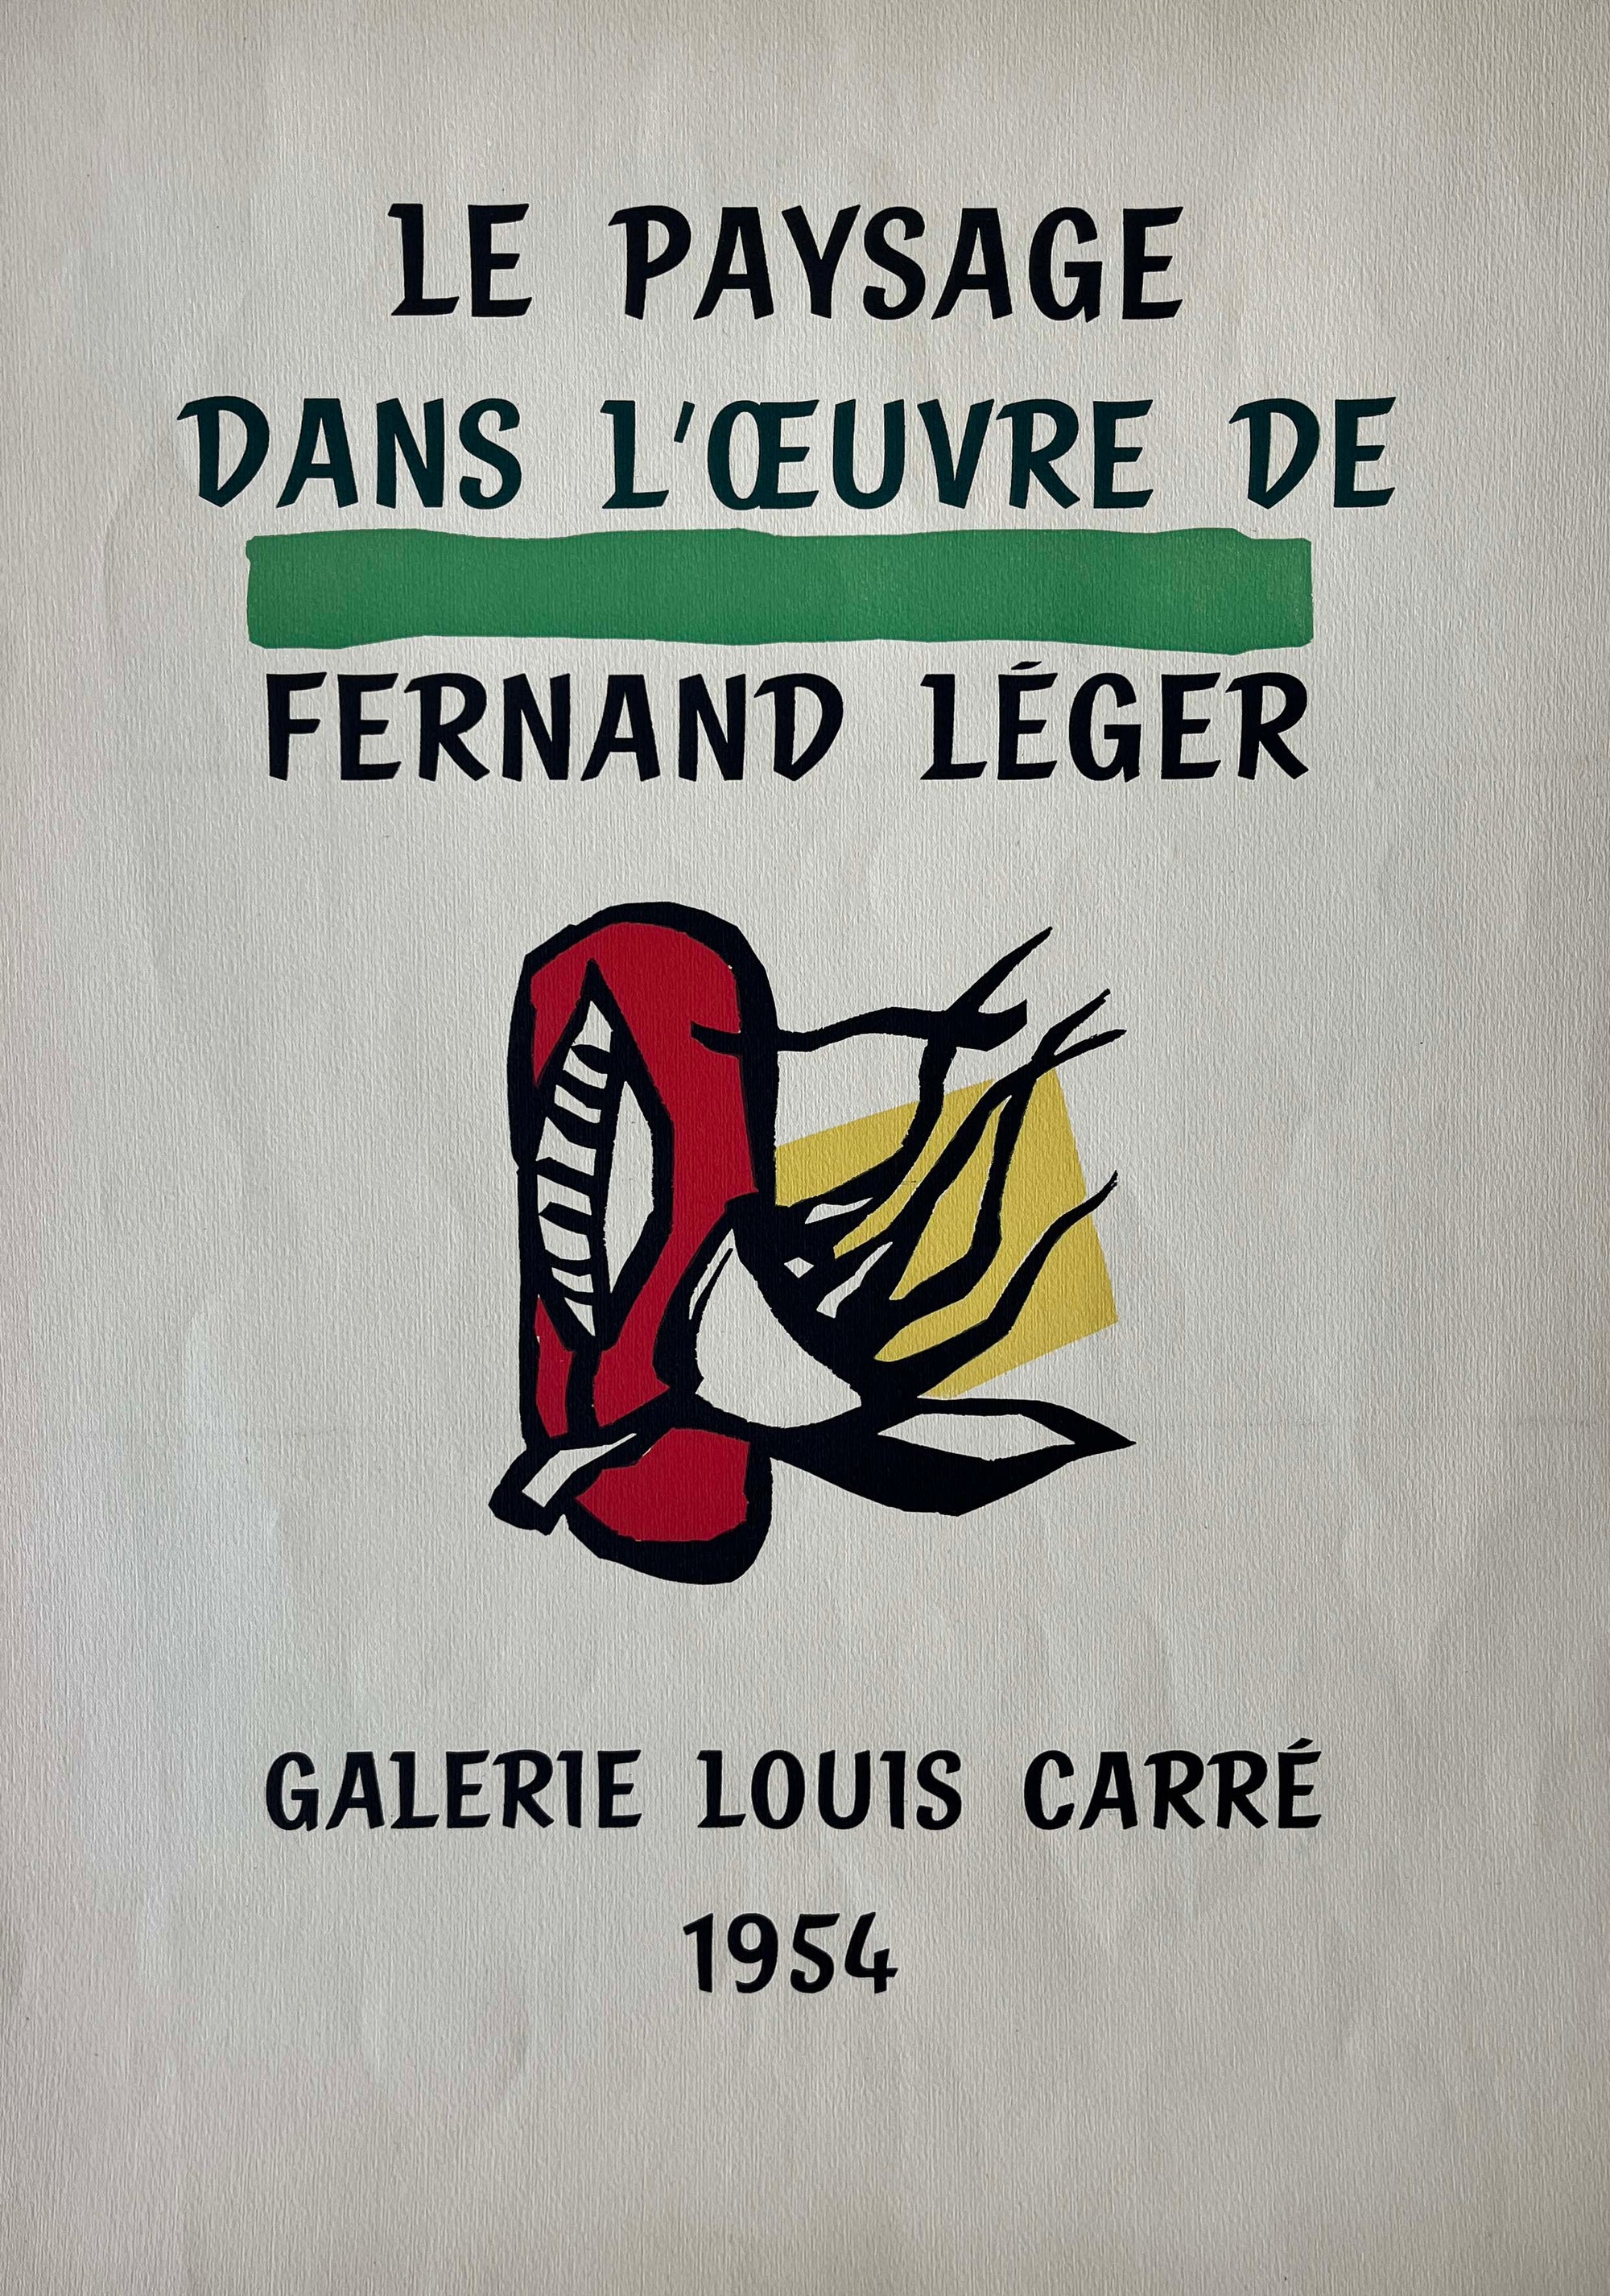 Lithograph Exhibition by Fernand Léger